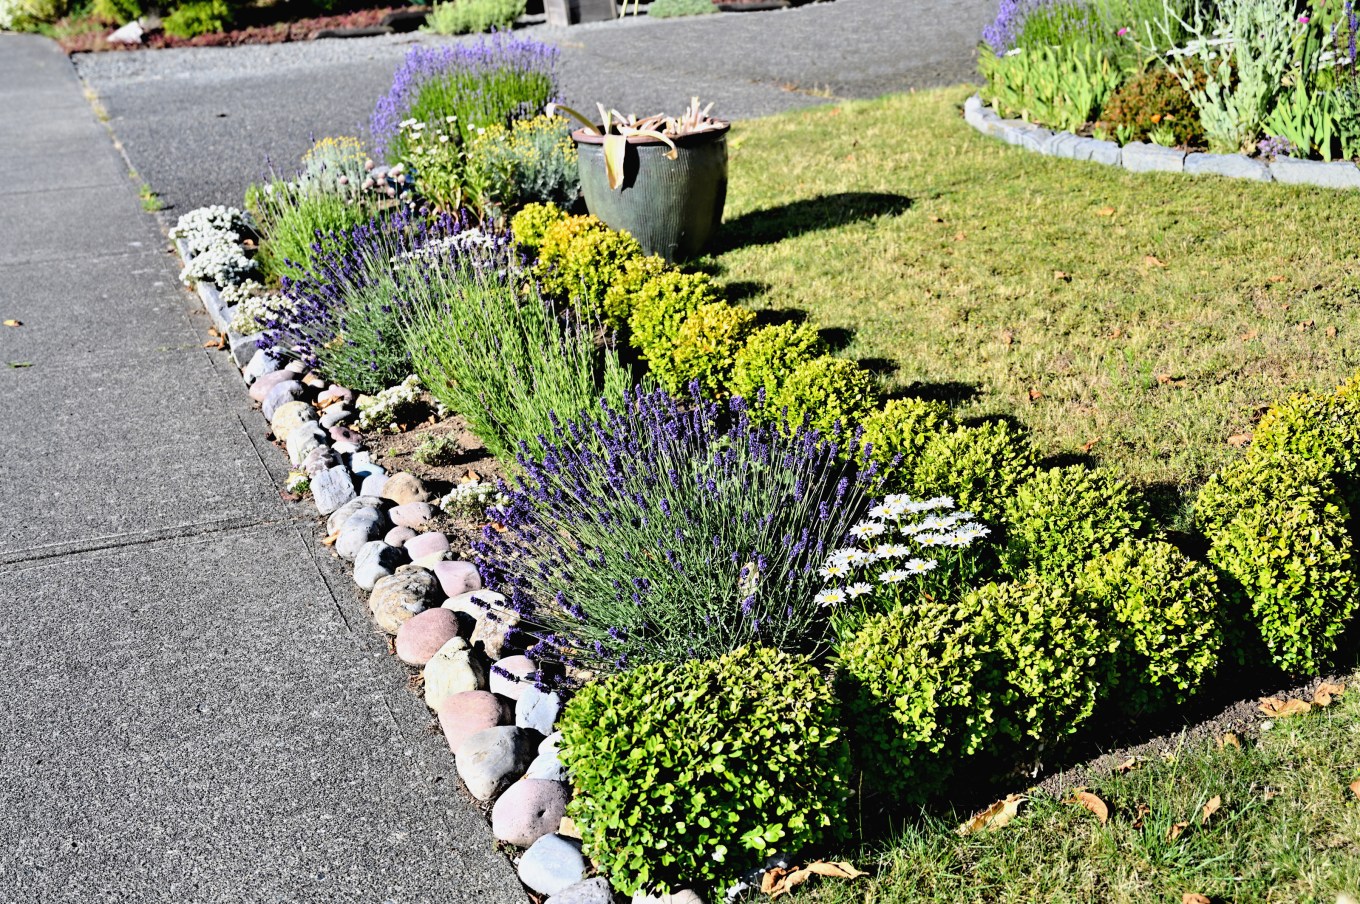 A simple formal flowerbed using some boxwood plants and some river rock as edging and filling the center with lavender flowers in bloom.